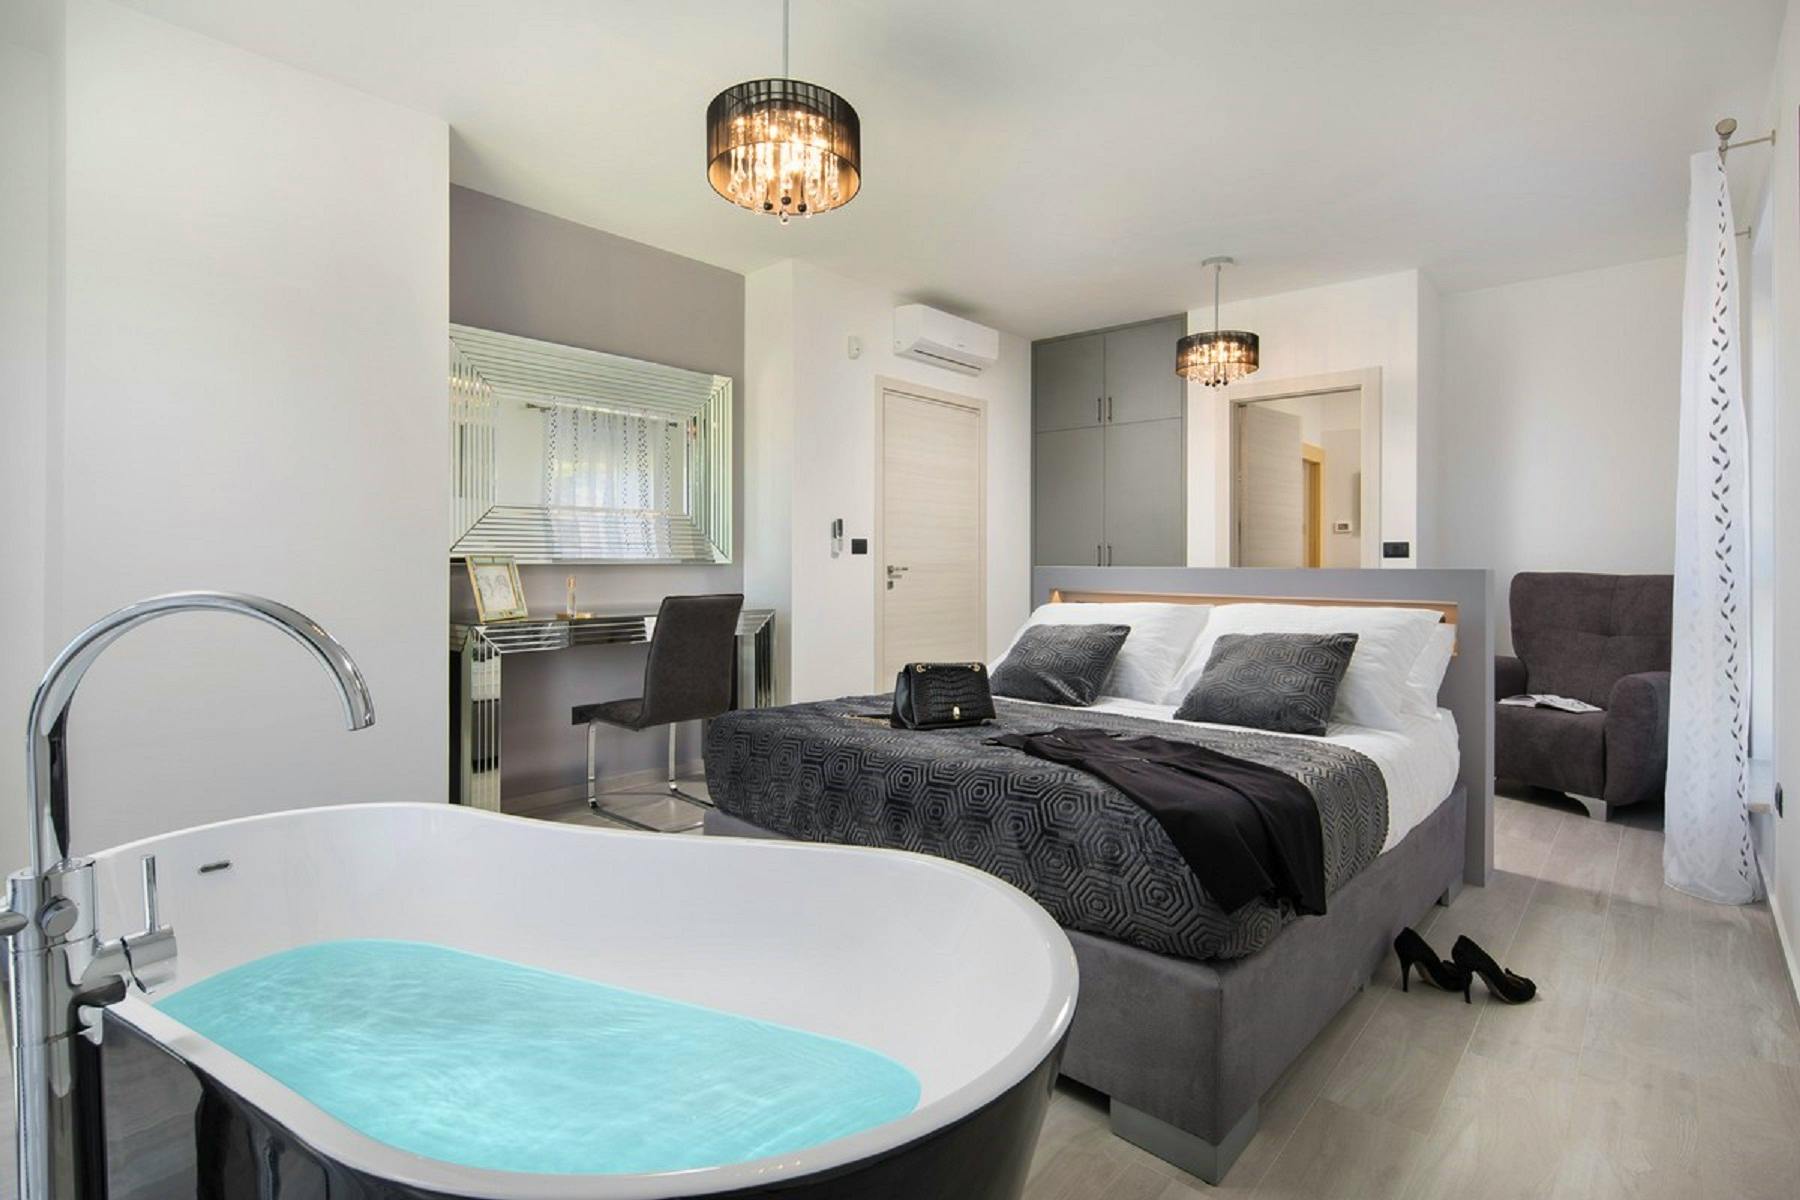 Furnished bedroom with a bathtub